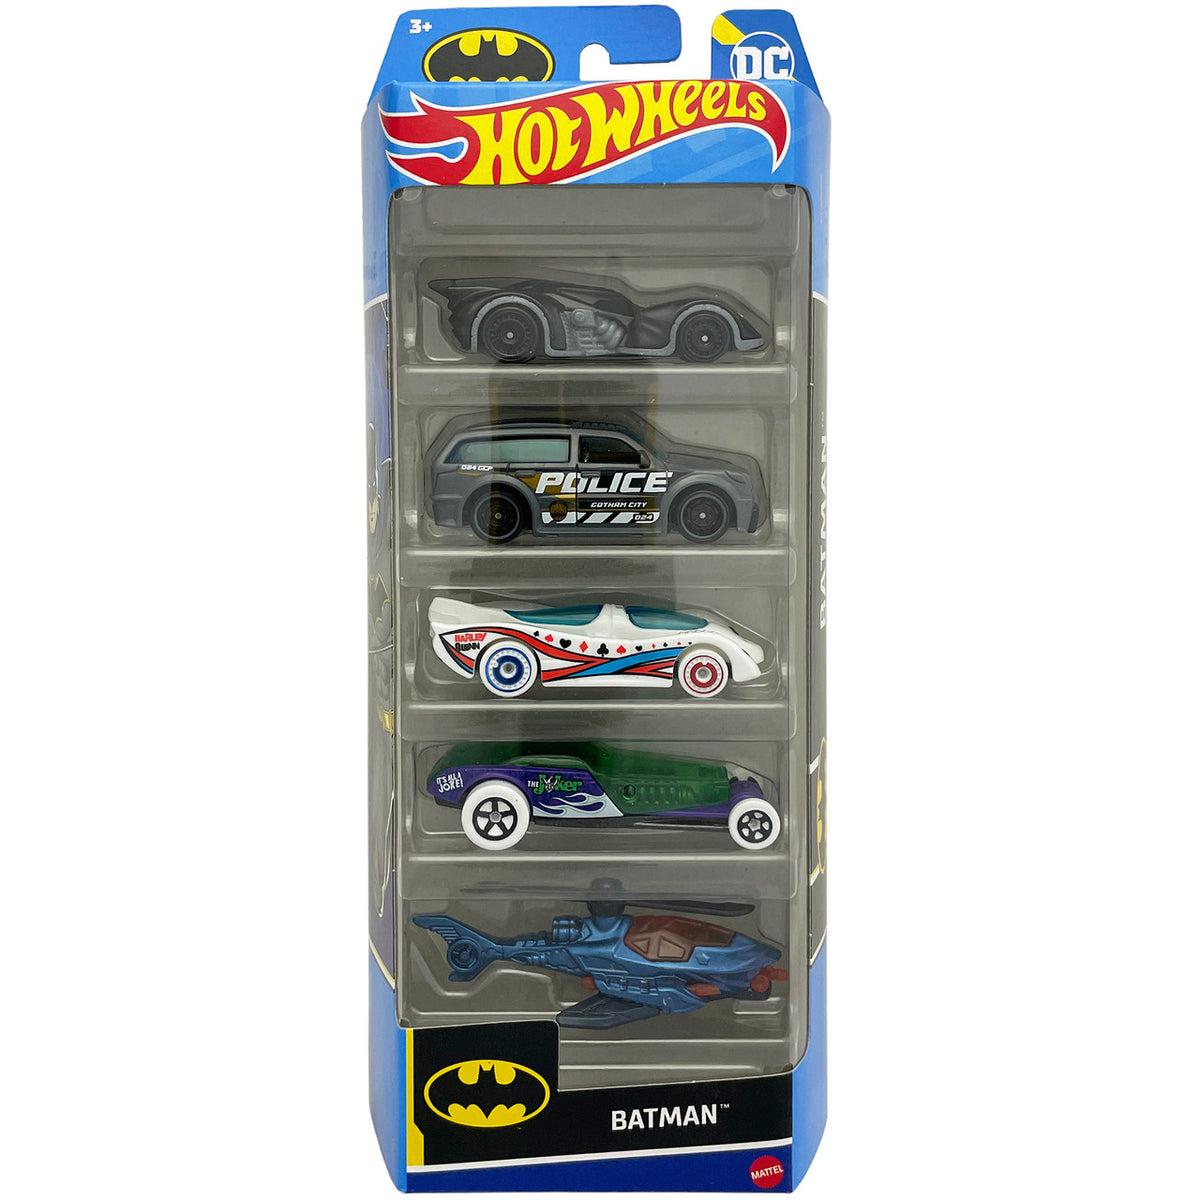 Hot Wheels 5 Car Gift Pack with 5 Premium Diecast Models - Design & Styles May Vary - Only 1 Pack Included